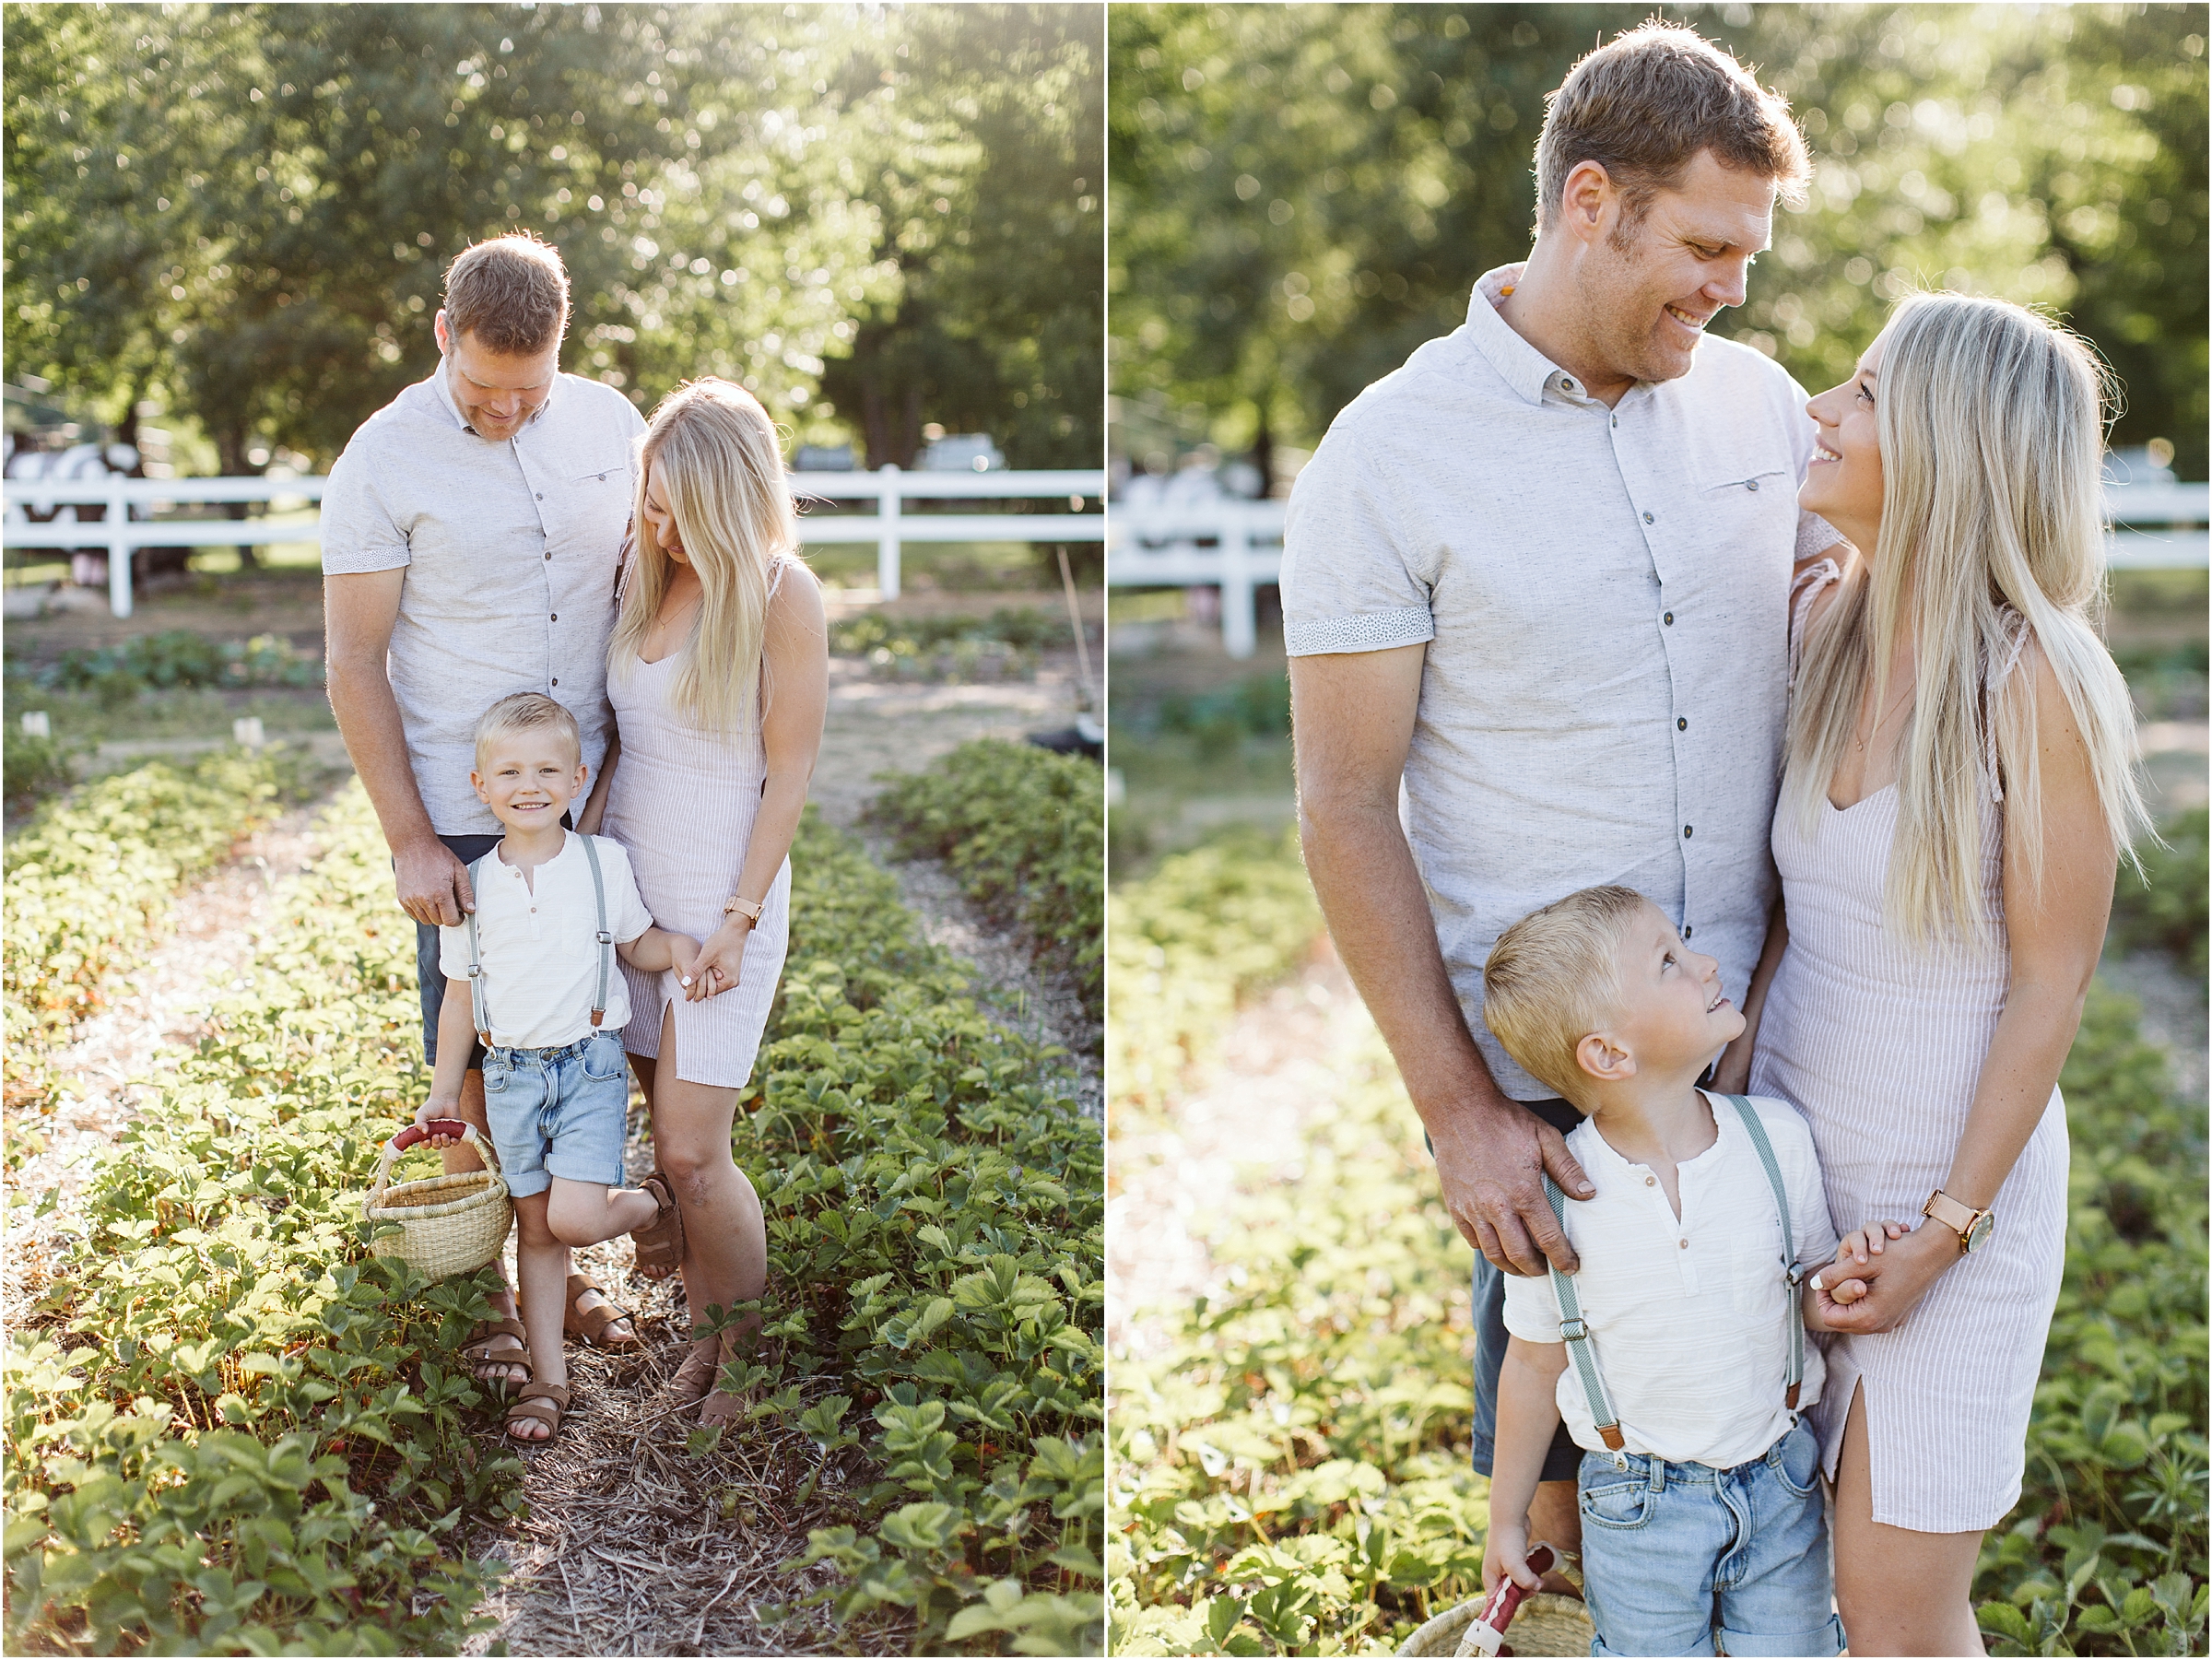 central wisconsin, stevens point, wausau, photographer, photography, lifestyle, family, strawberry patch, outdoors, natural, alysa rene photography